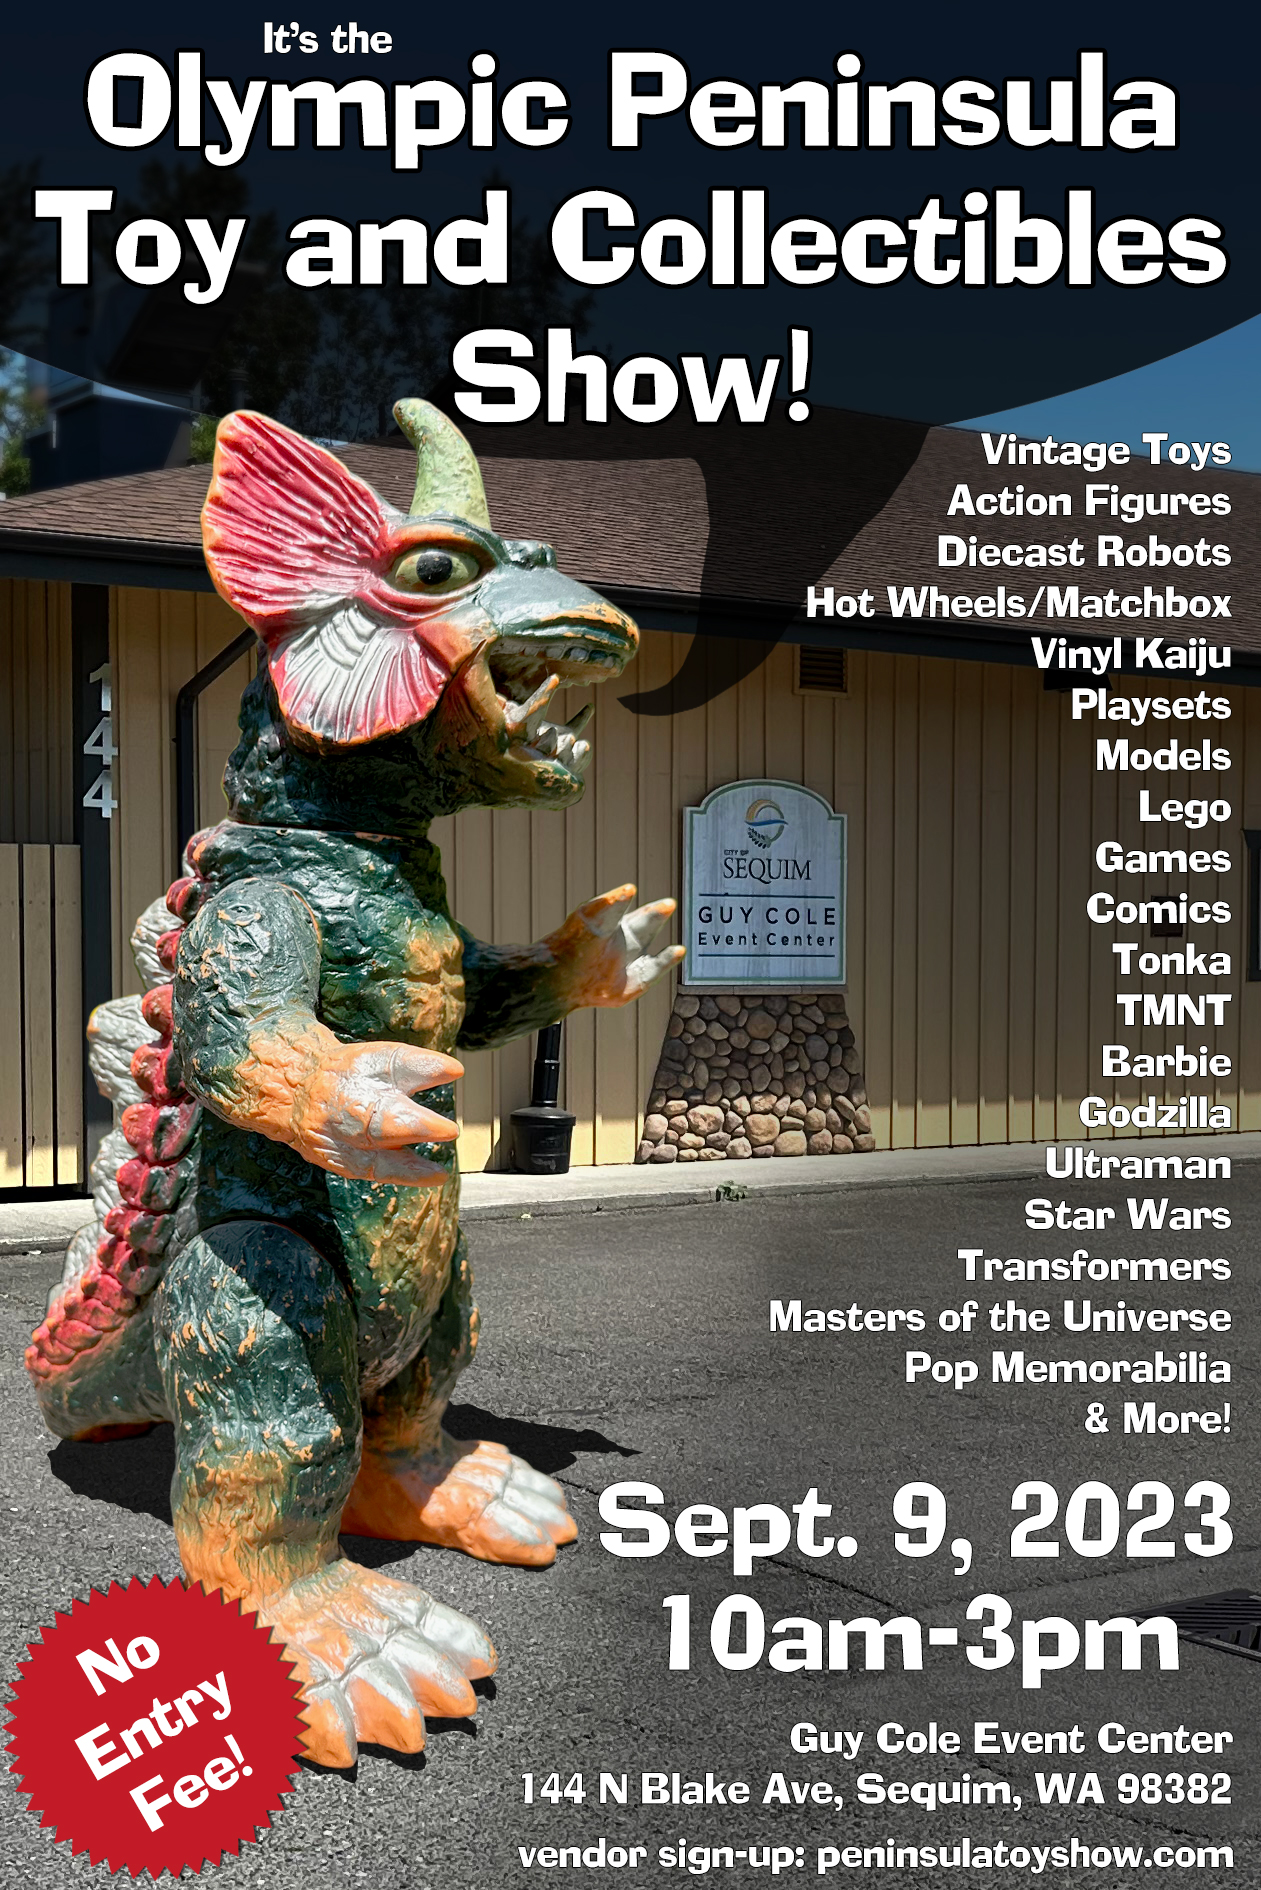 The Olympic Peninsula Toy and Collectibles Show